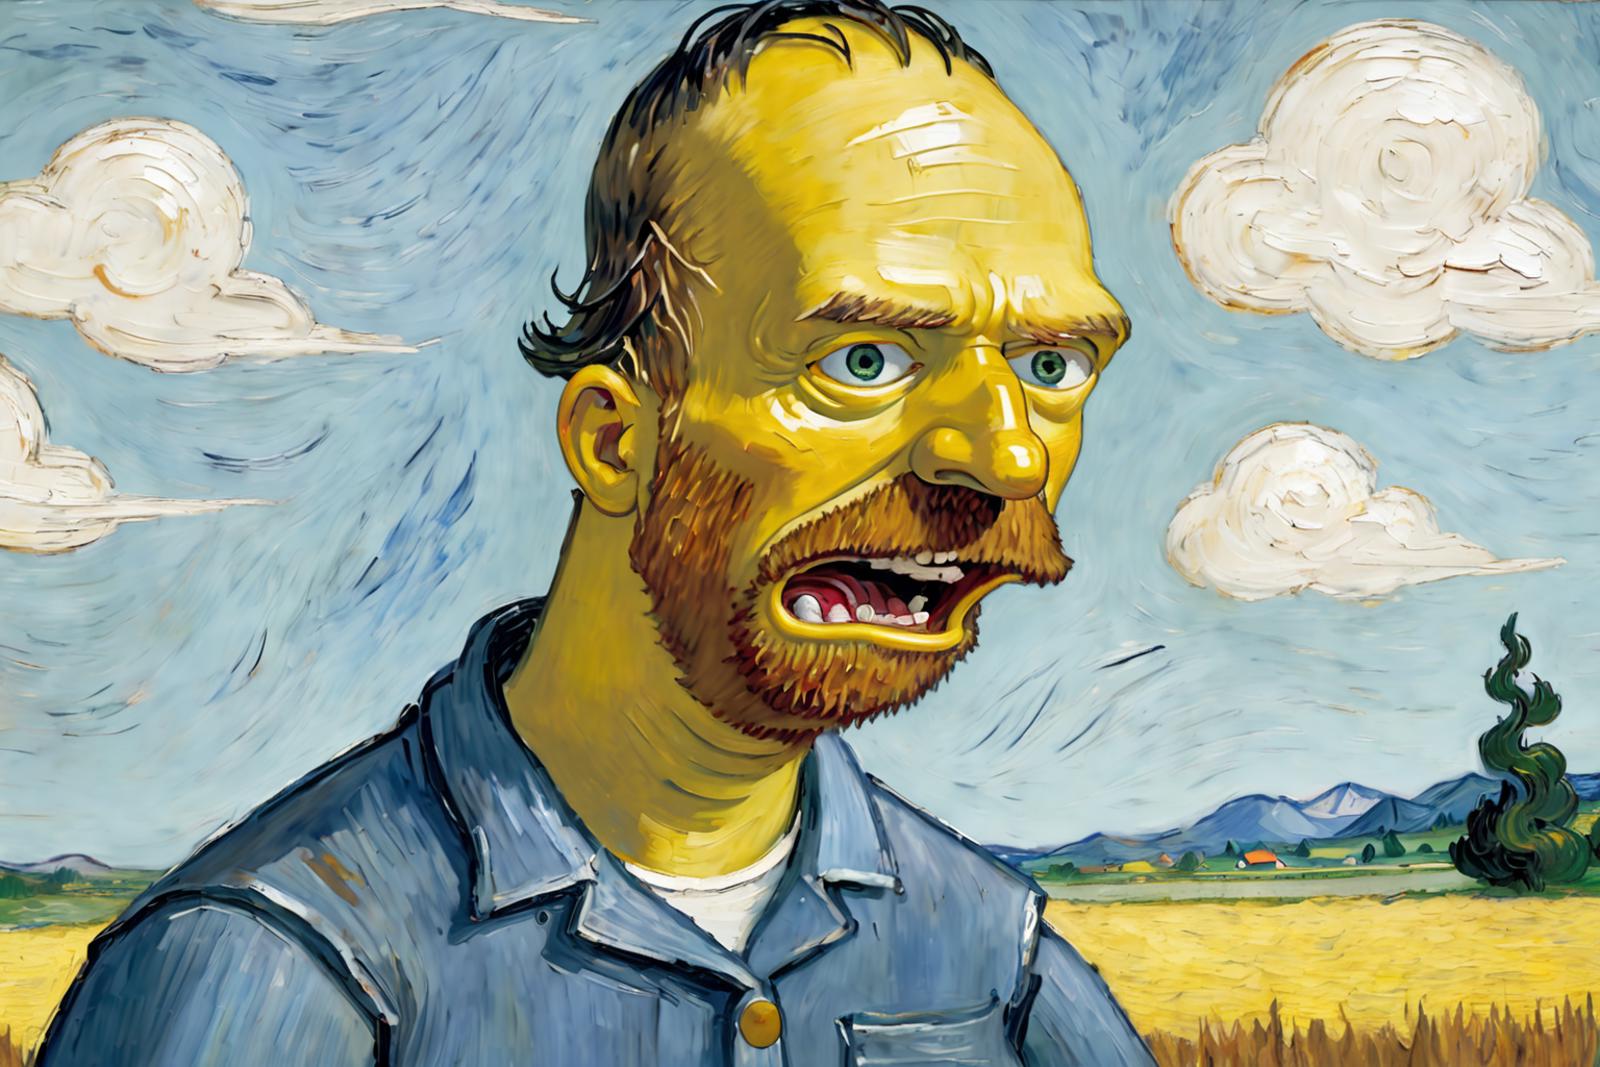 A painting of a man with a red beard and mustache screaming in front of a blue sky with clouds.